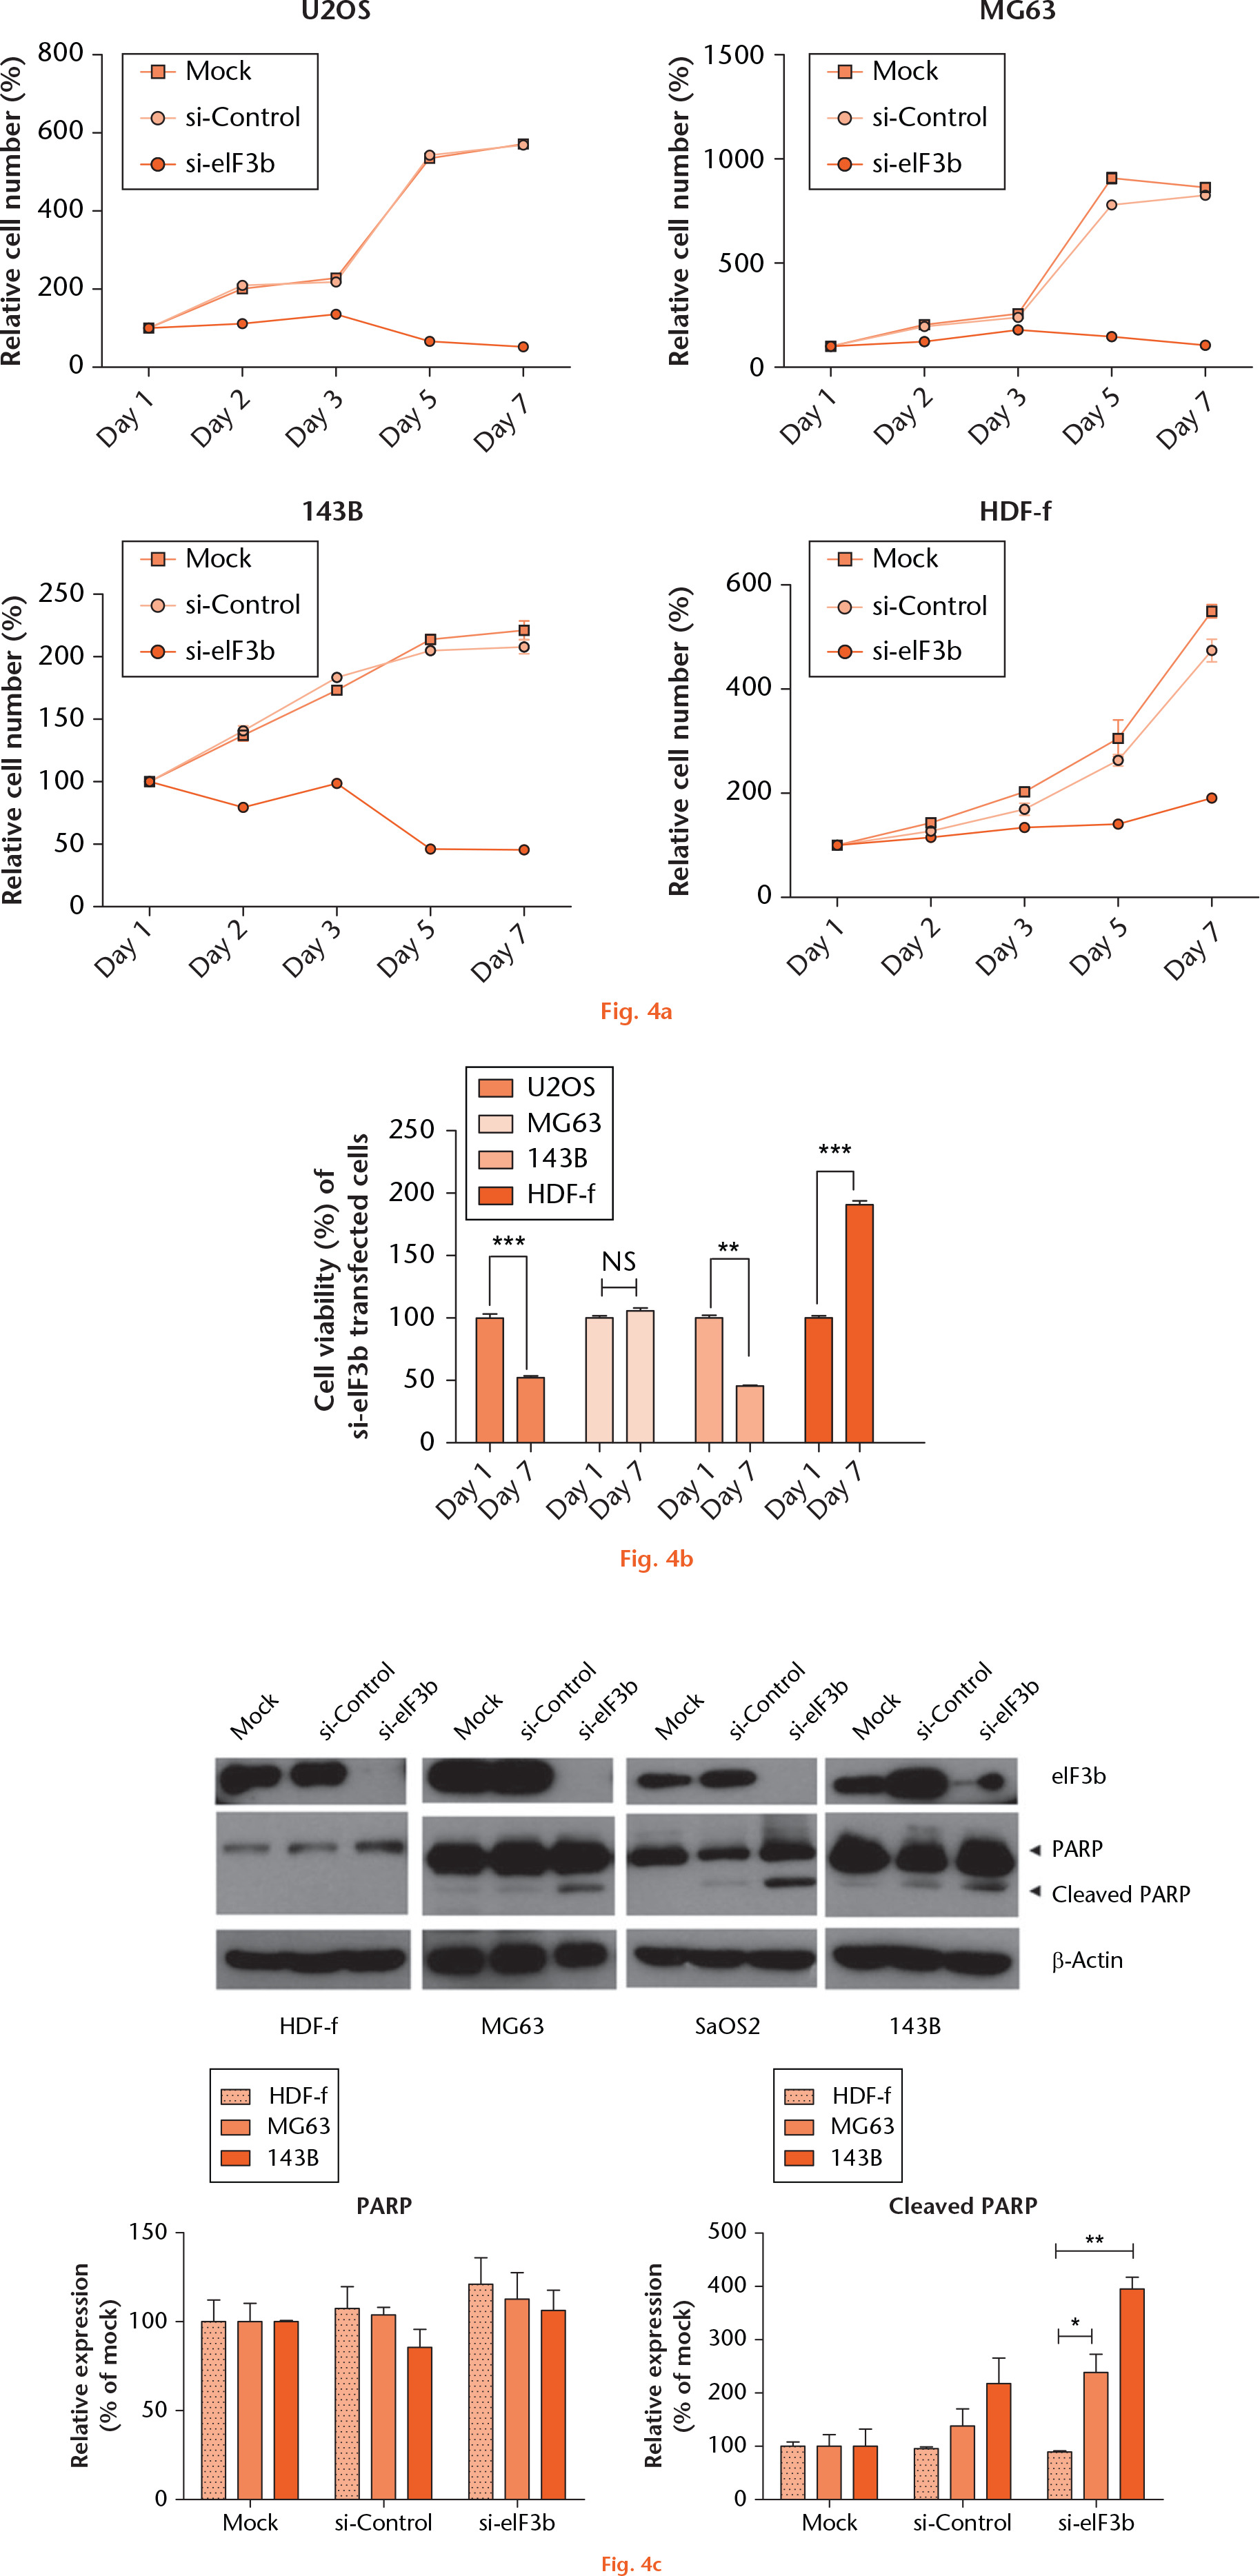  
            TNFRSF21 induces cell death in U2OS cells. a) Cells were transfected with control or eIF3b siRNA. After transfection, cell viability was measured for seven days. Day one indicates 24 hours after transfection. b) Cell viability at day one and seven after eIF3b siRNA transfection was compared. c) Three days after transfection, the level of cleaved poly ADP ribose polymerase fragment was examined by Western blot analysis (top) and Western blot band was quantified (bottom). The significance of the statistical comparisons was determined via two-tailed t-test (* p < 0.05; ** p < 0.01; *** p < 0.001; NS, not significant).
          